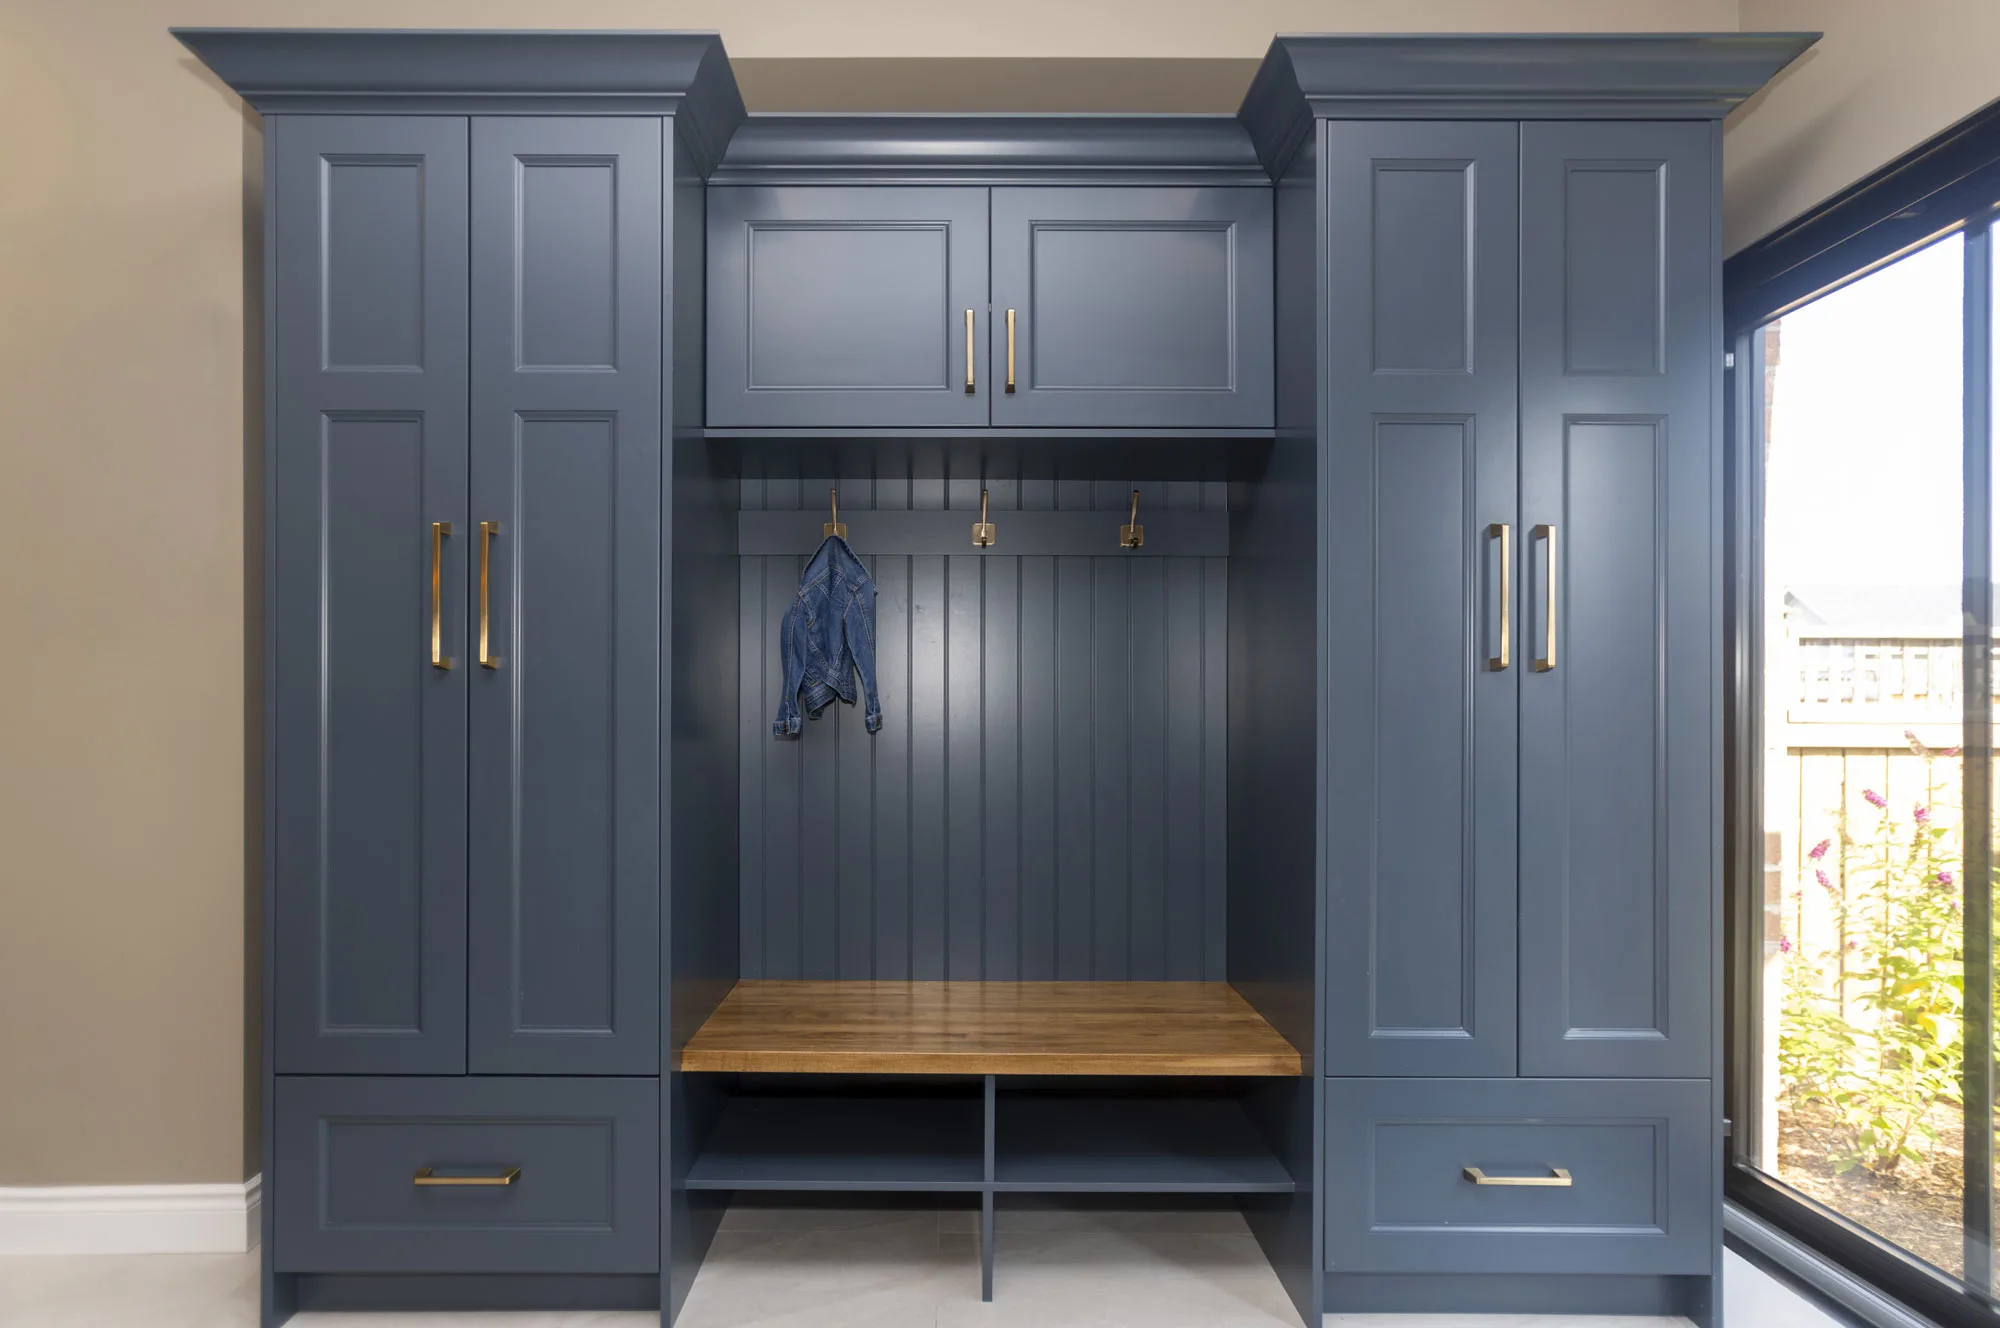 A dark blue custom built storage cabinets with gold handles and hooks